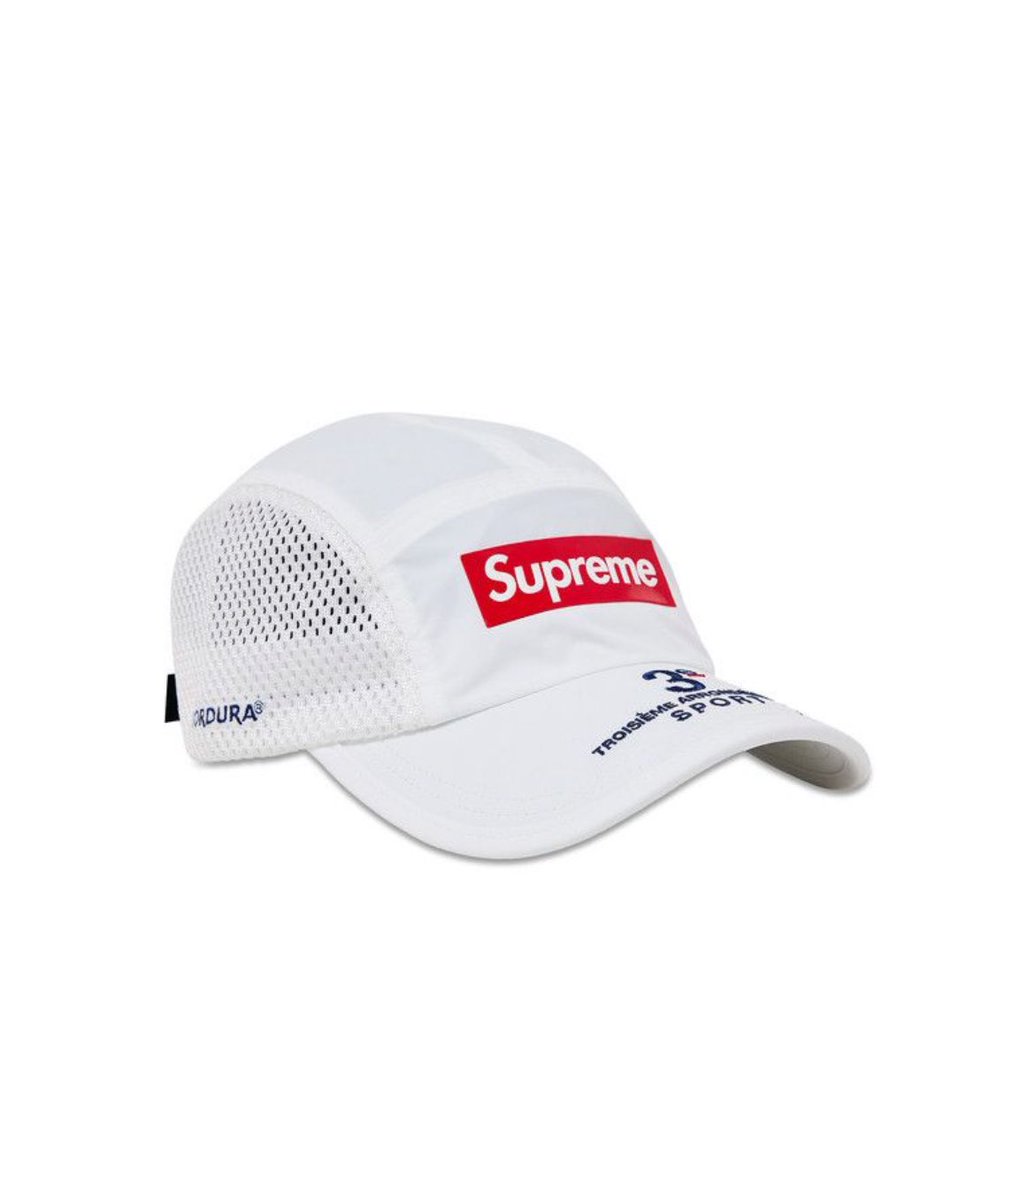 The last few weeks, I have been able to checkout the hats I wanted from Supreme! 🙏🏾🙌🏾👏🏾